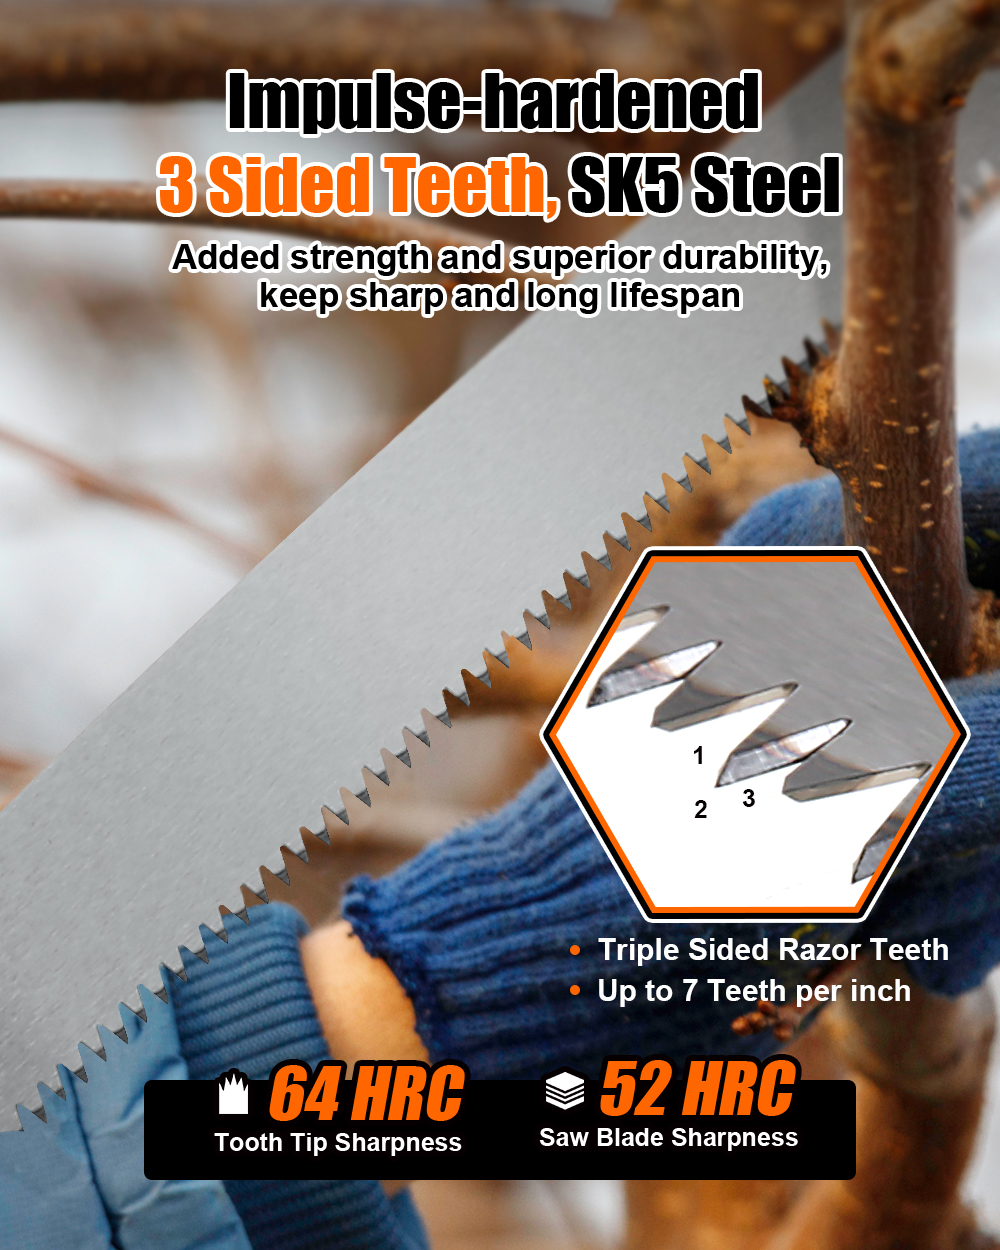 TOPSHAK-TS-DS5-350mm-Straight-Saw-Use-for-Gardening-Camping-Tree-Trimming-Cutting-Wood-Branches-1935639-3